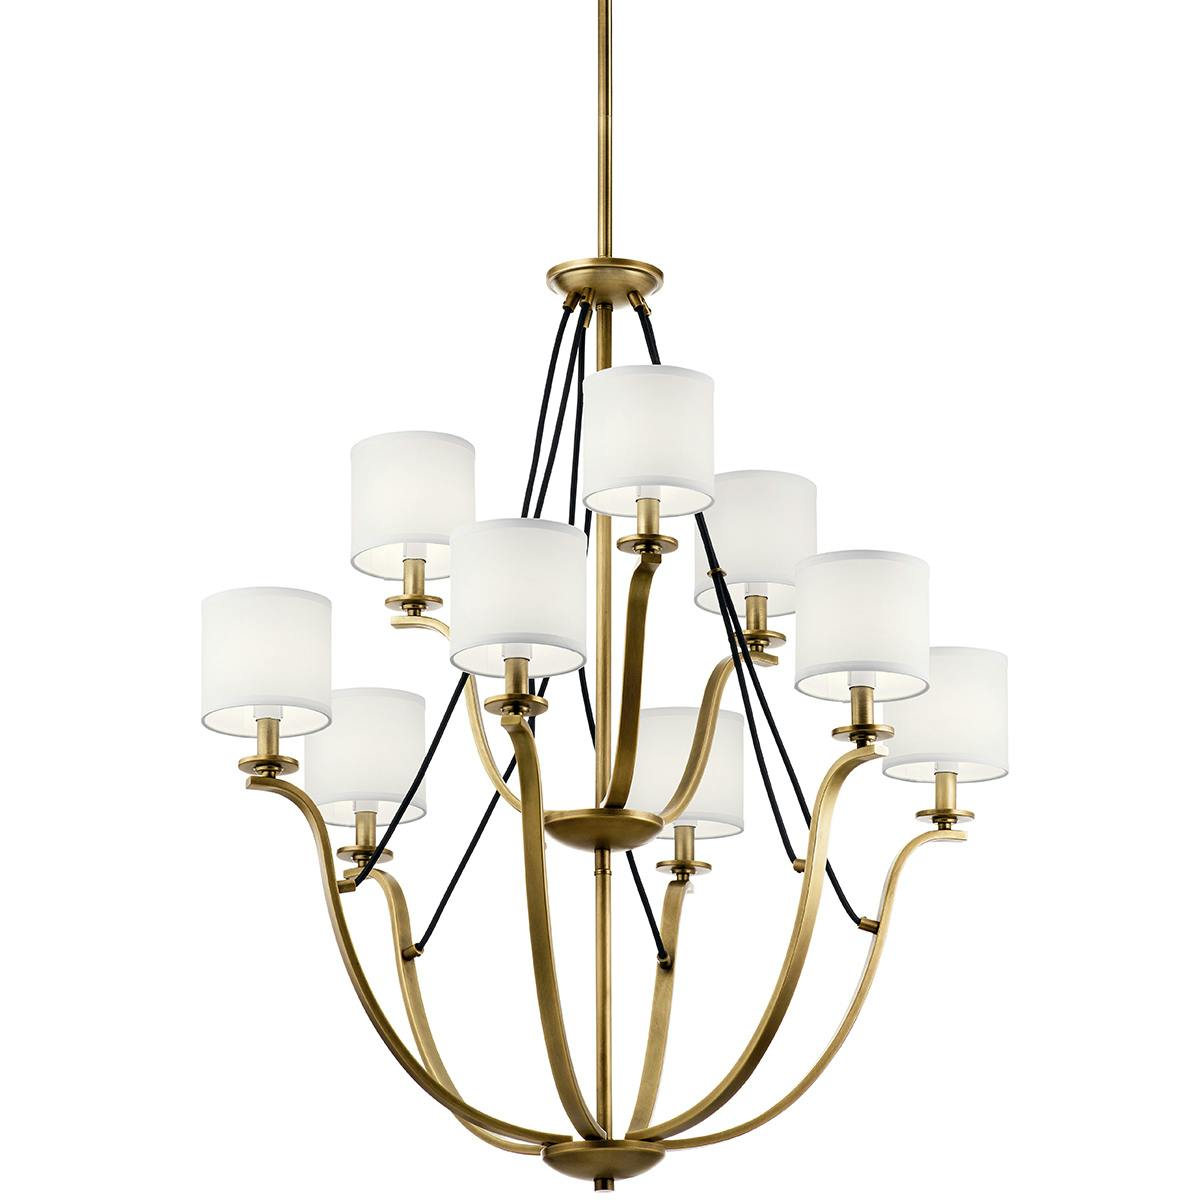 Close up view of the Thisbe 9 Light Chandelier Natural Brass on a white background